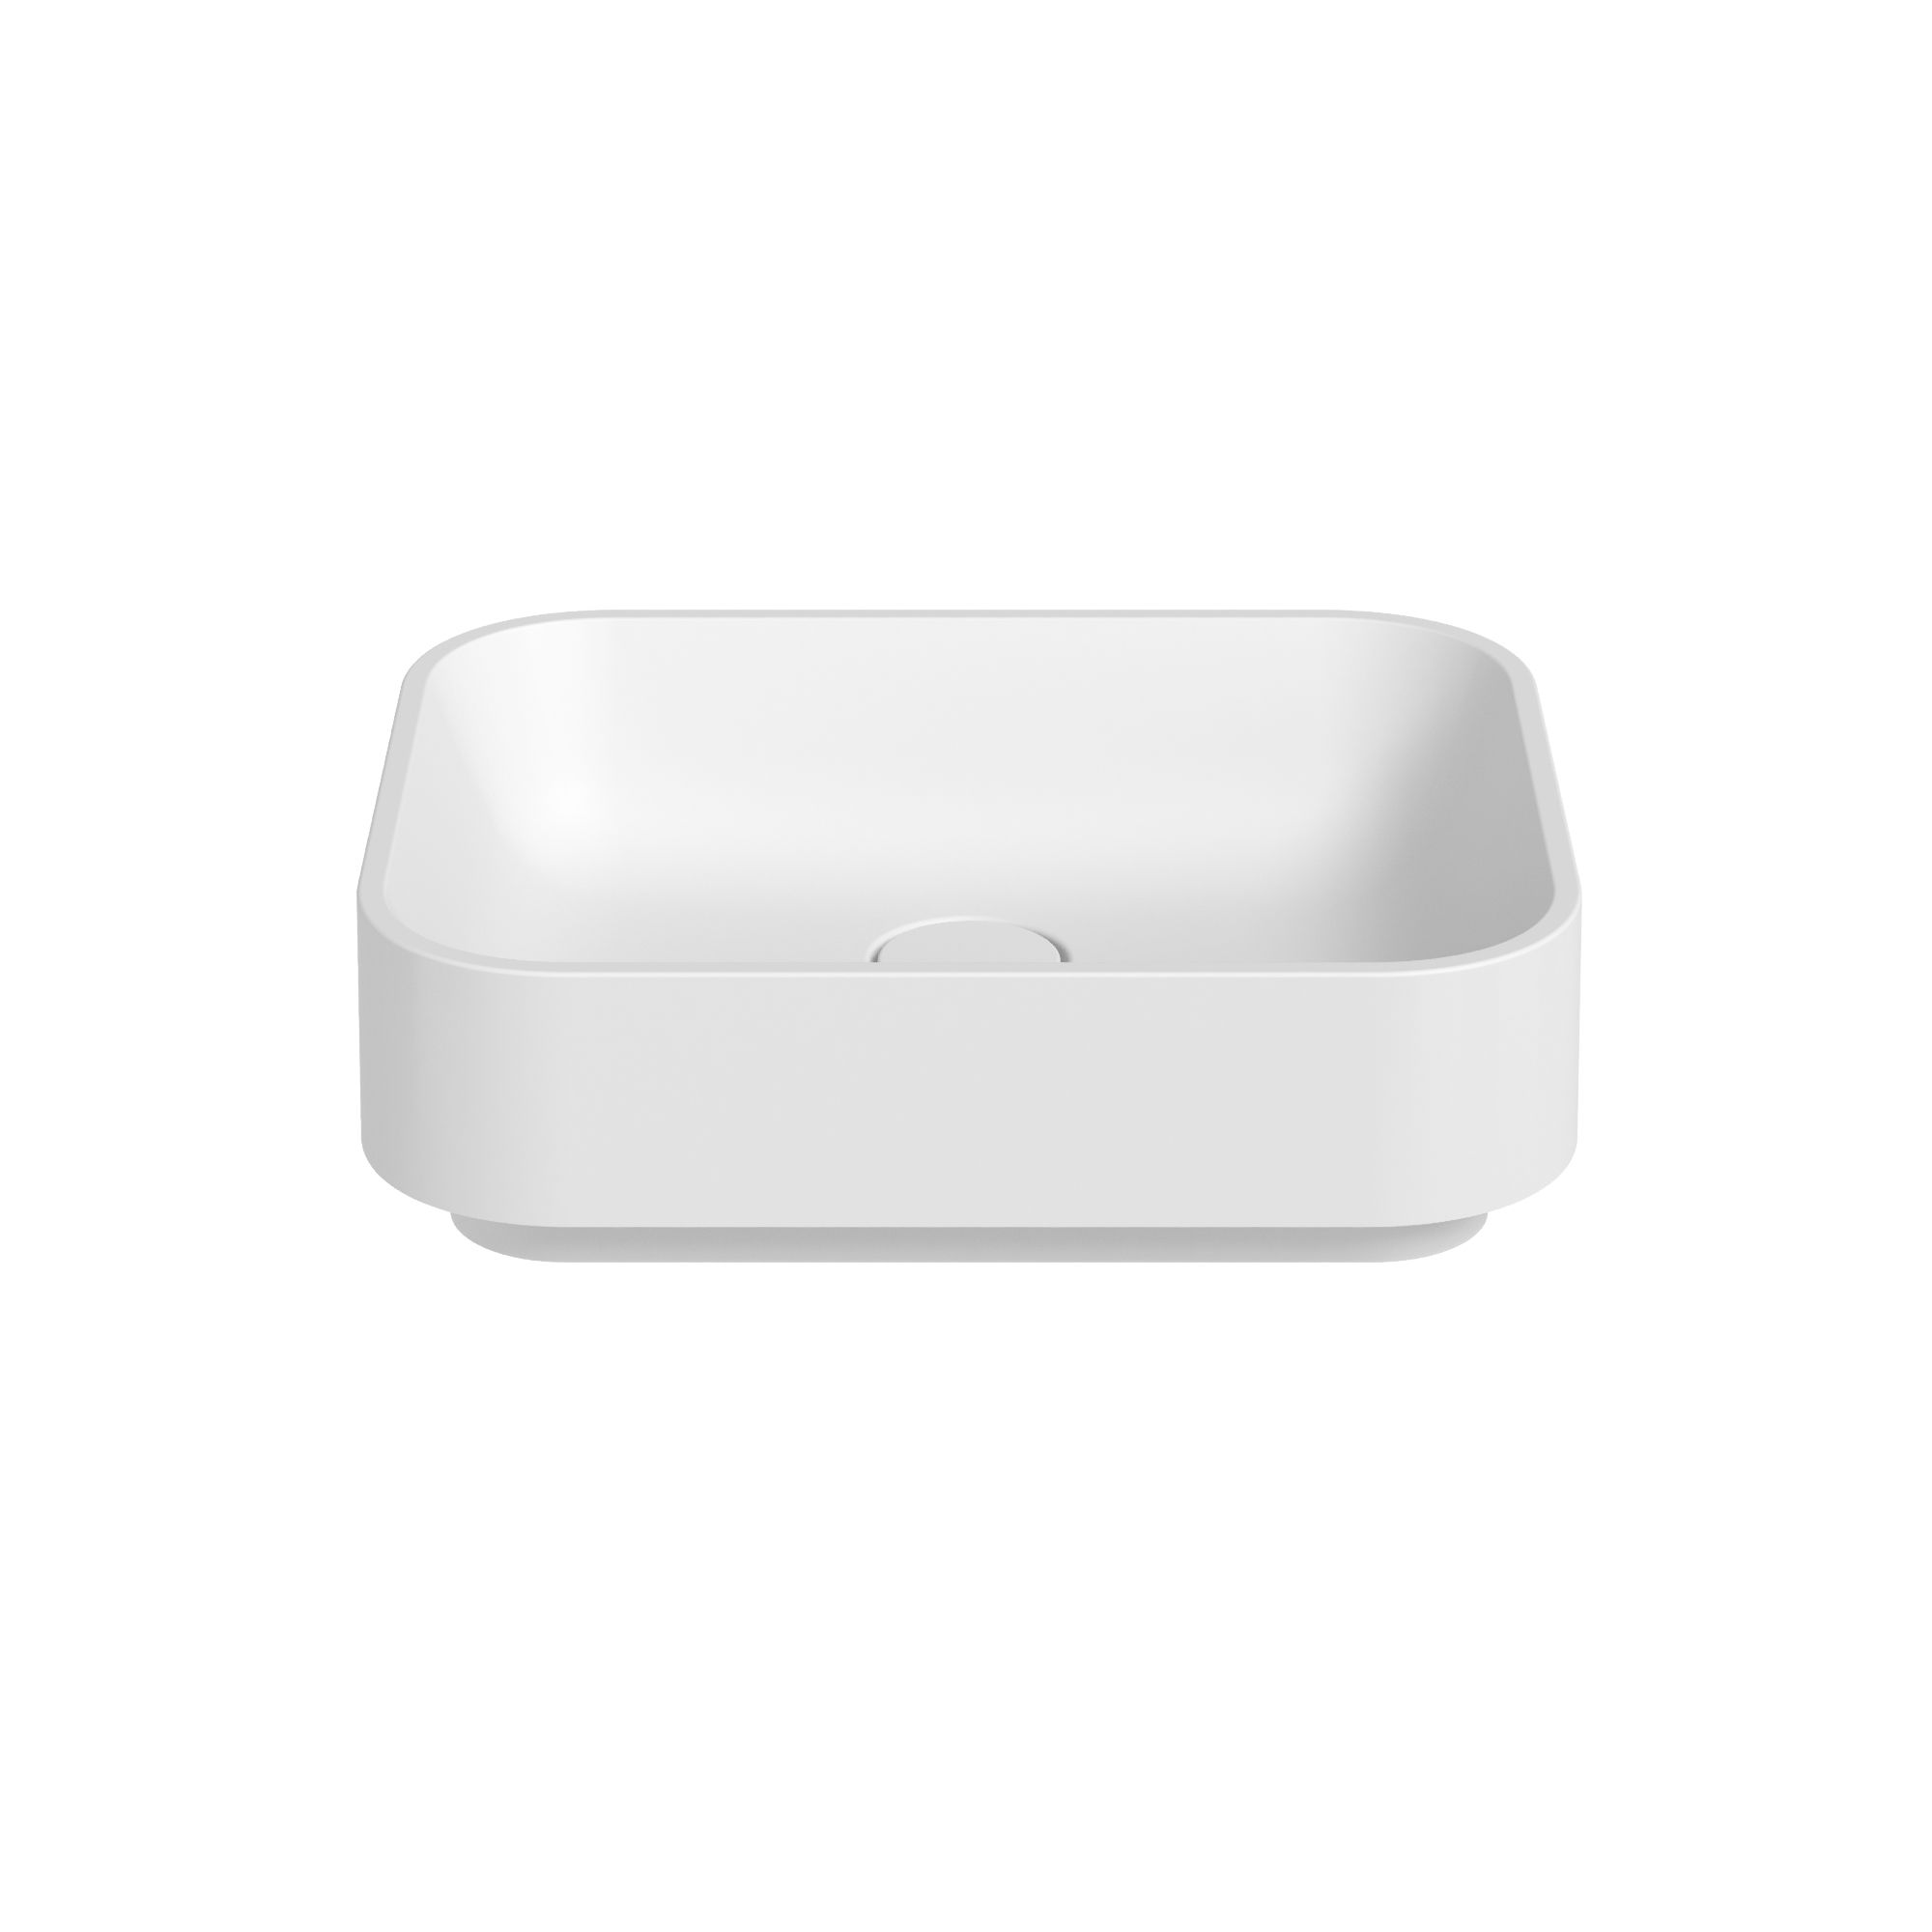 The Rye Countertop Basin & Integrated Free Flow Waste 400x400mm